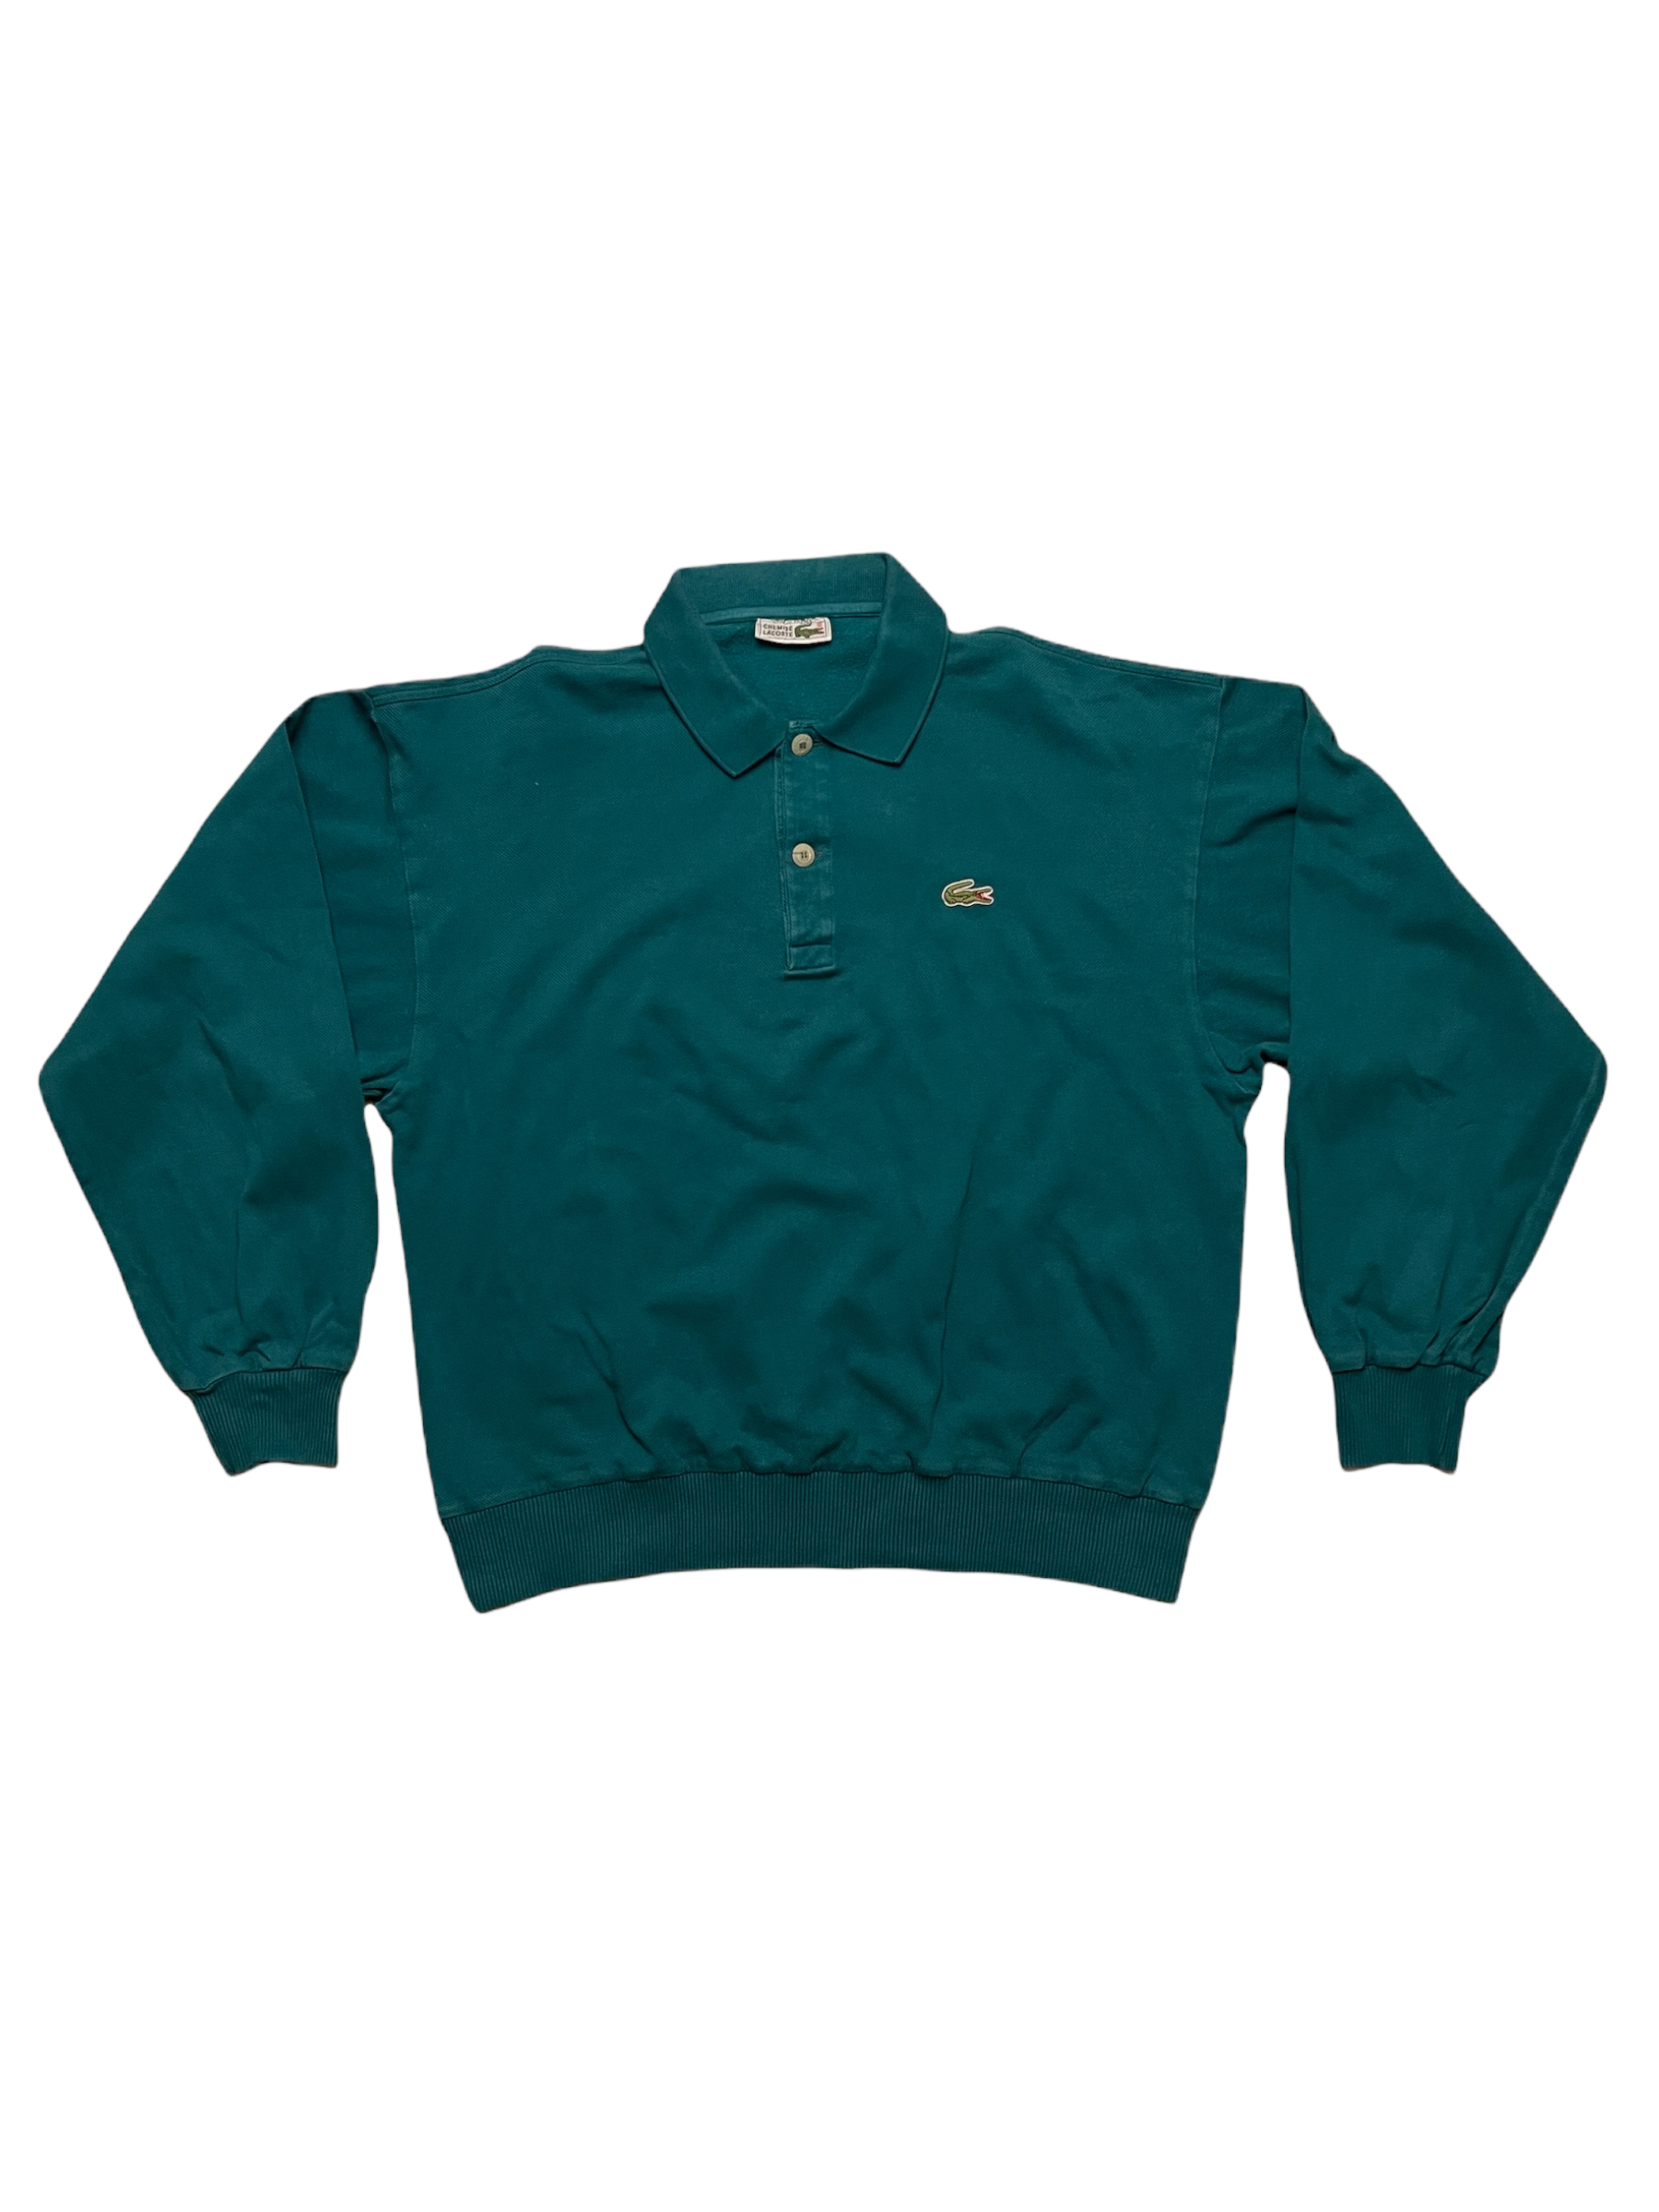 Vintage Lacoste Chemise Polo Shirt Long Sleeve Sweatshirt Pique Made in France Green 100% Cotton Size M-L